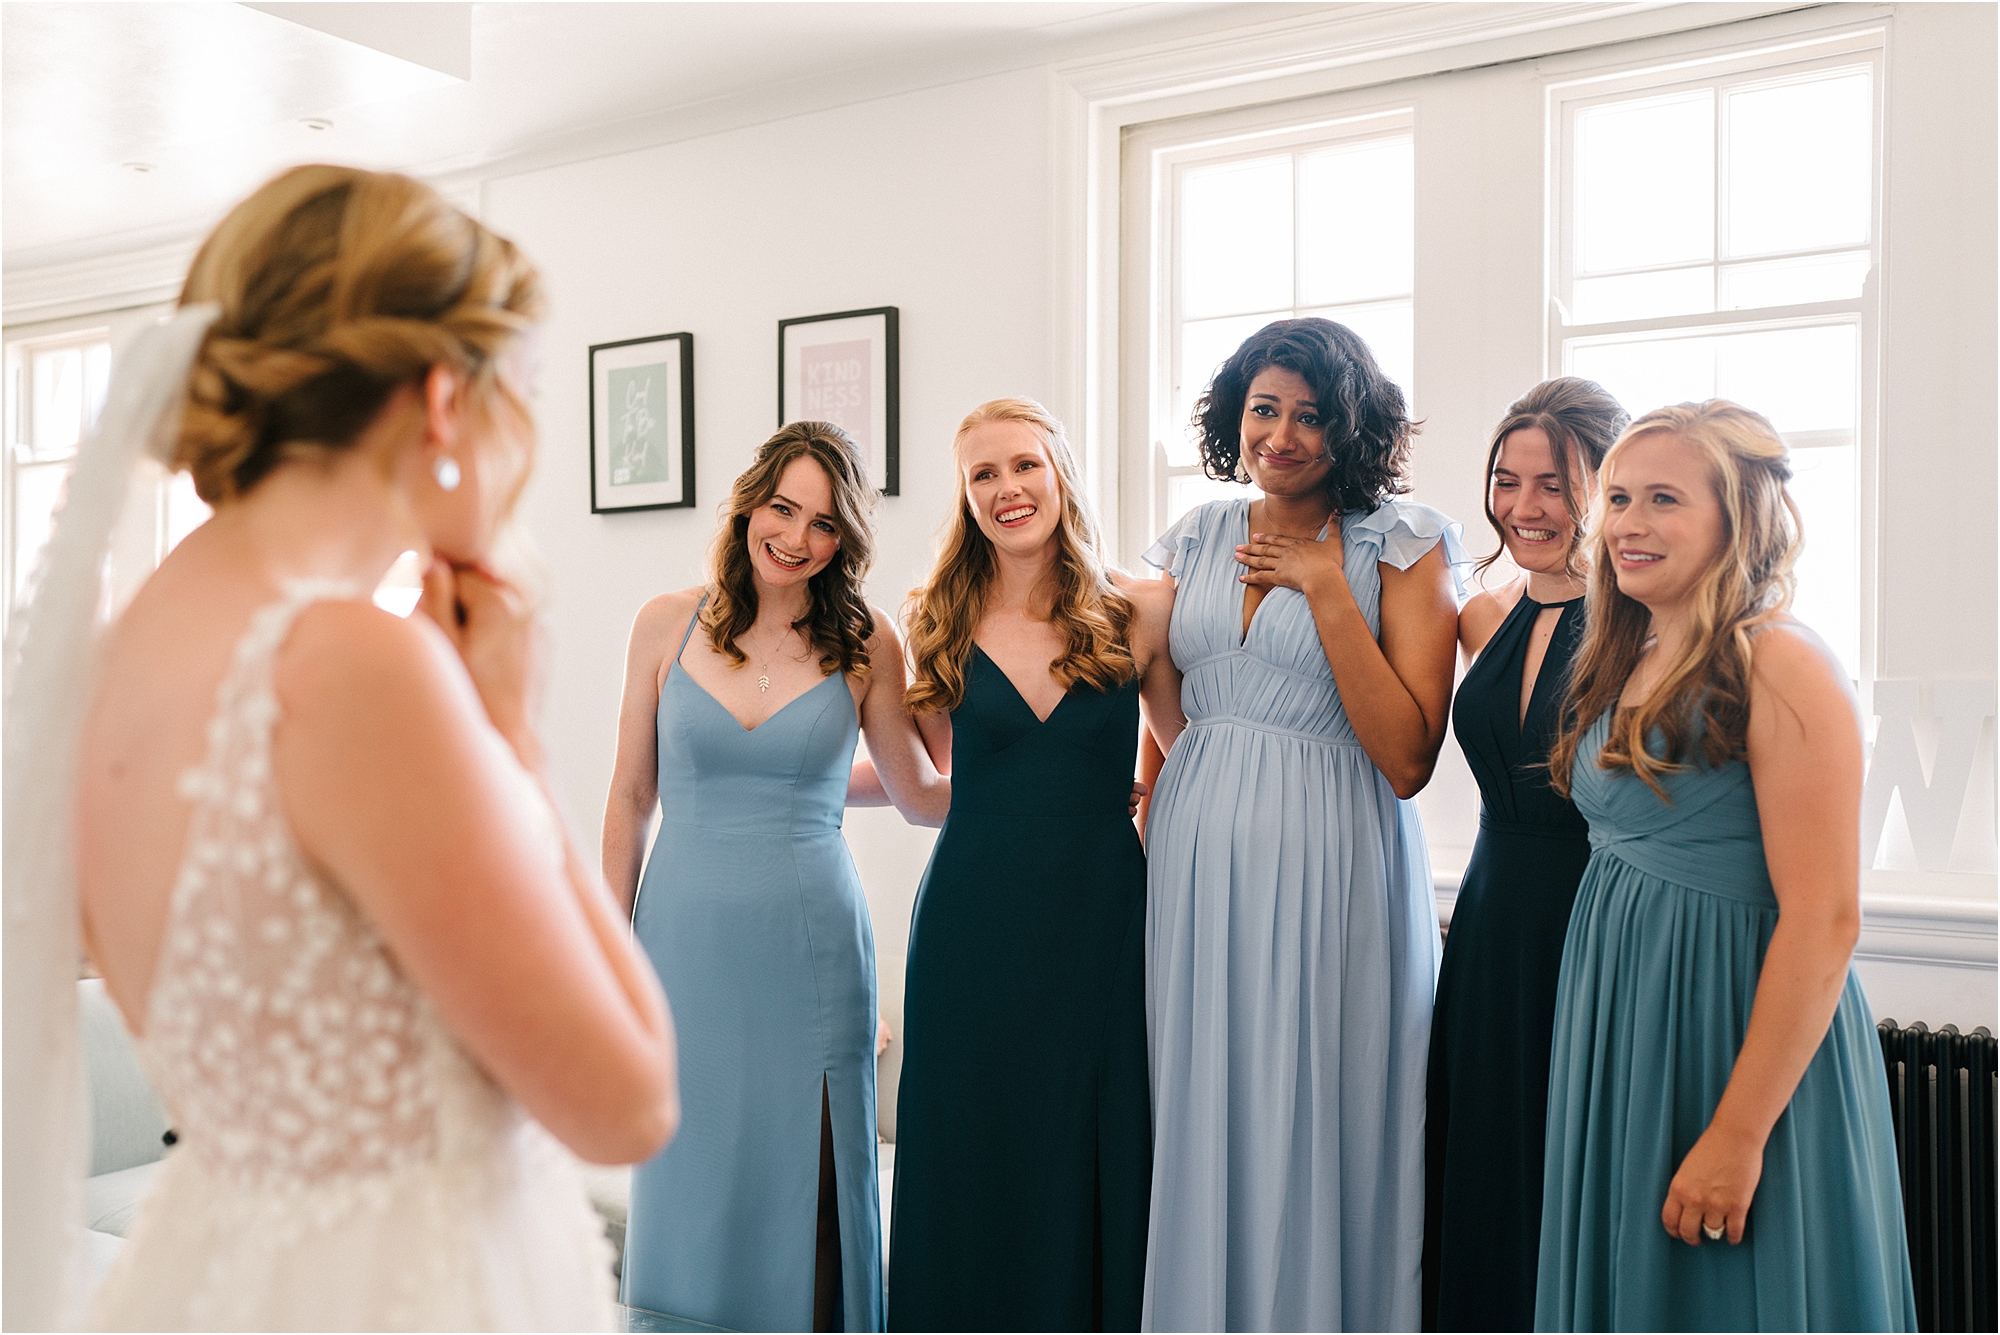 Bridesmaids seeing a bride for the first time in her dress. 